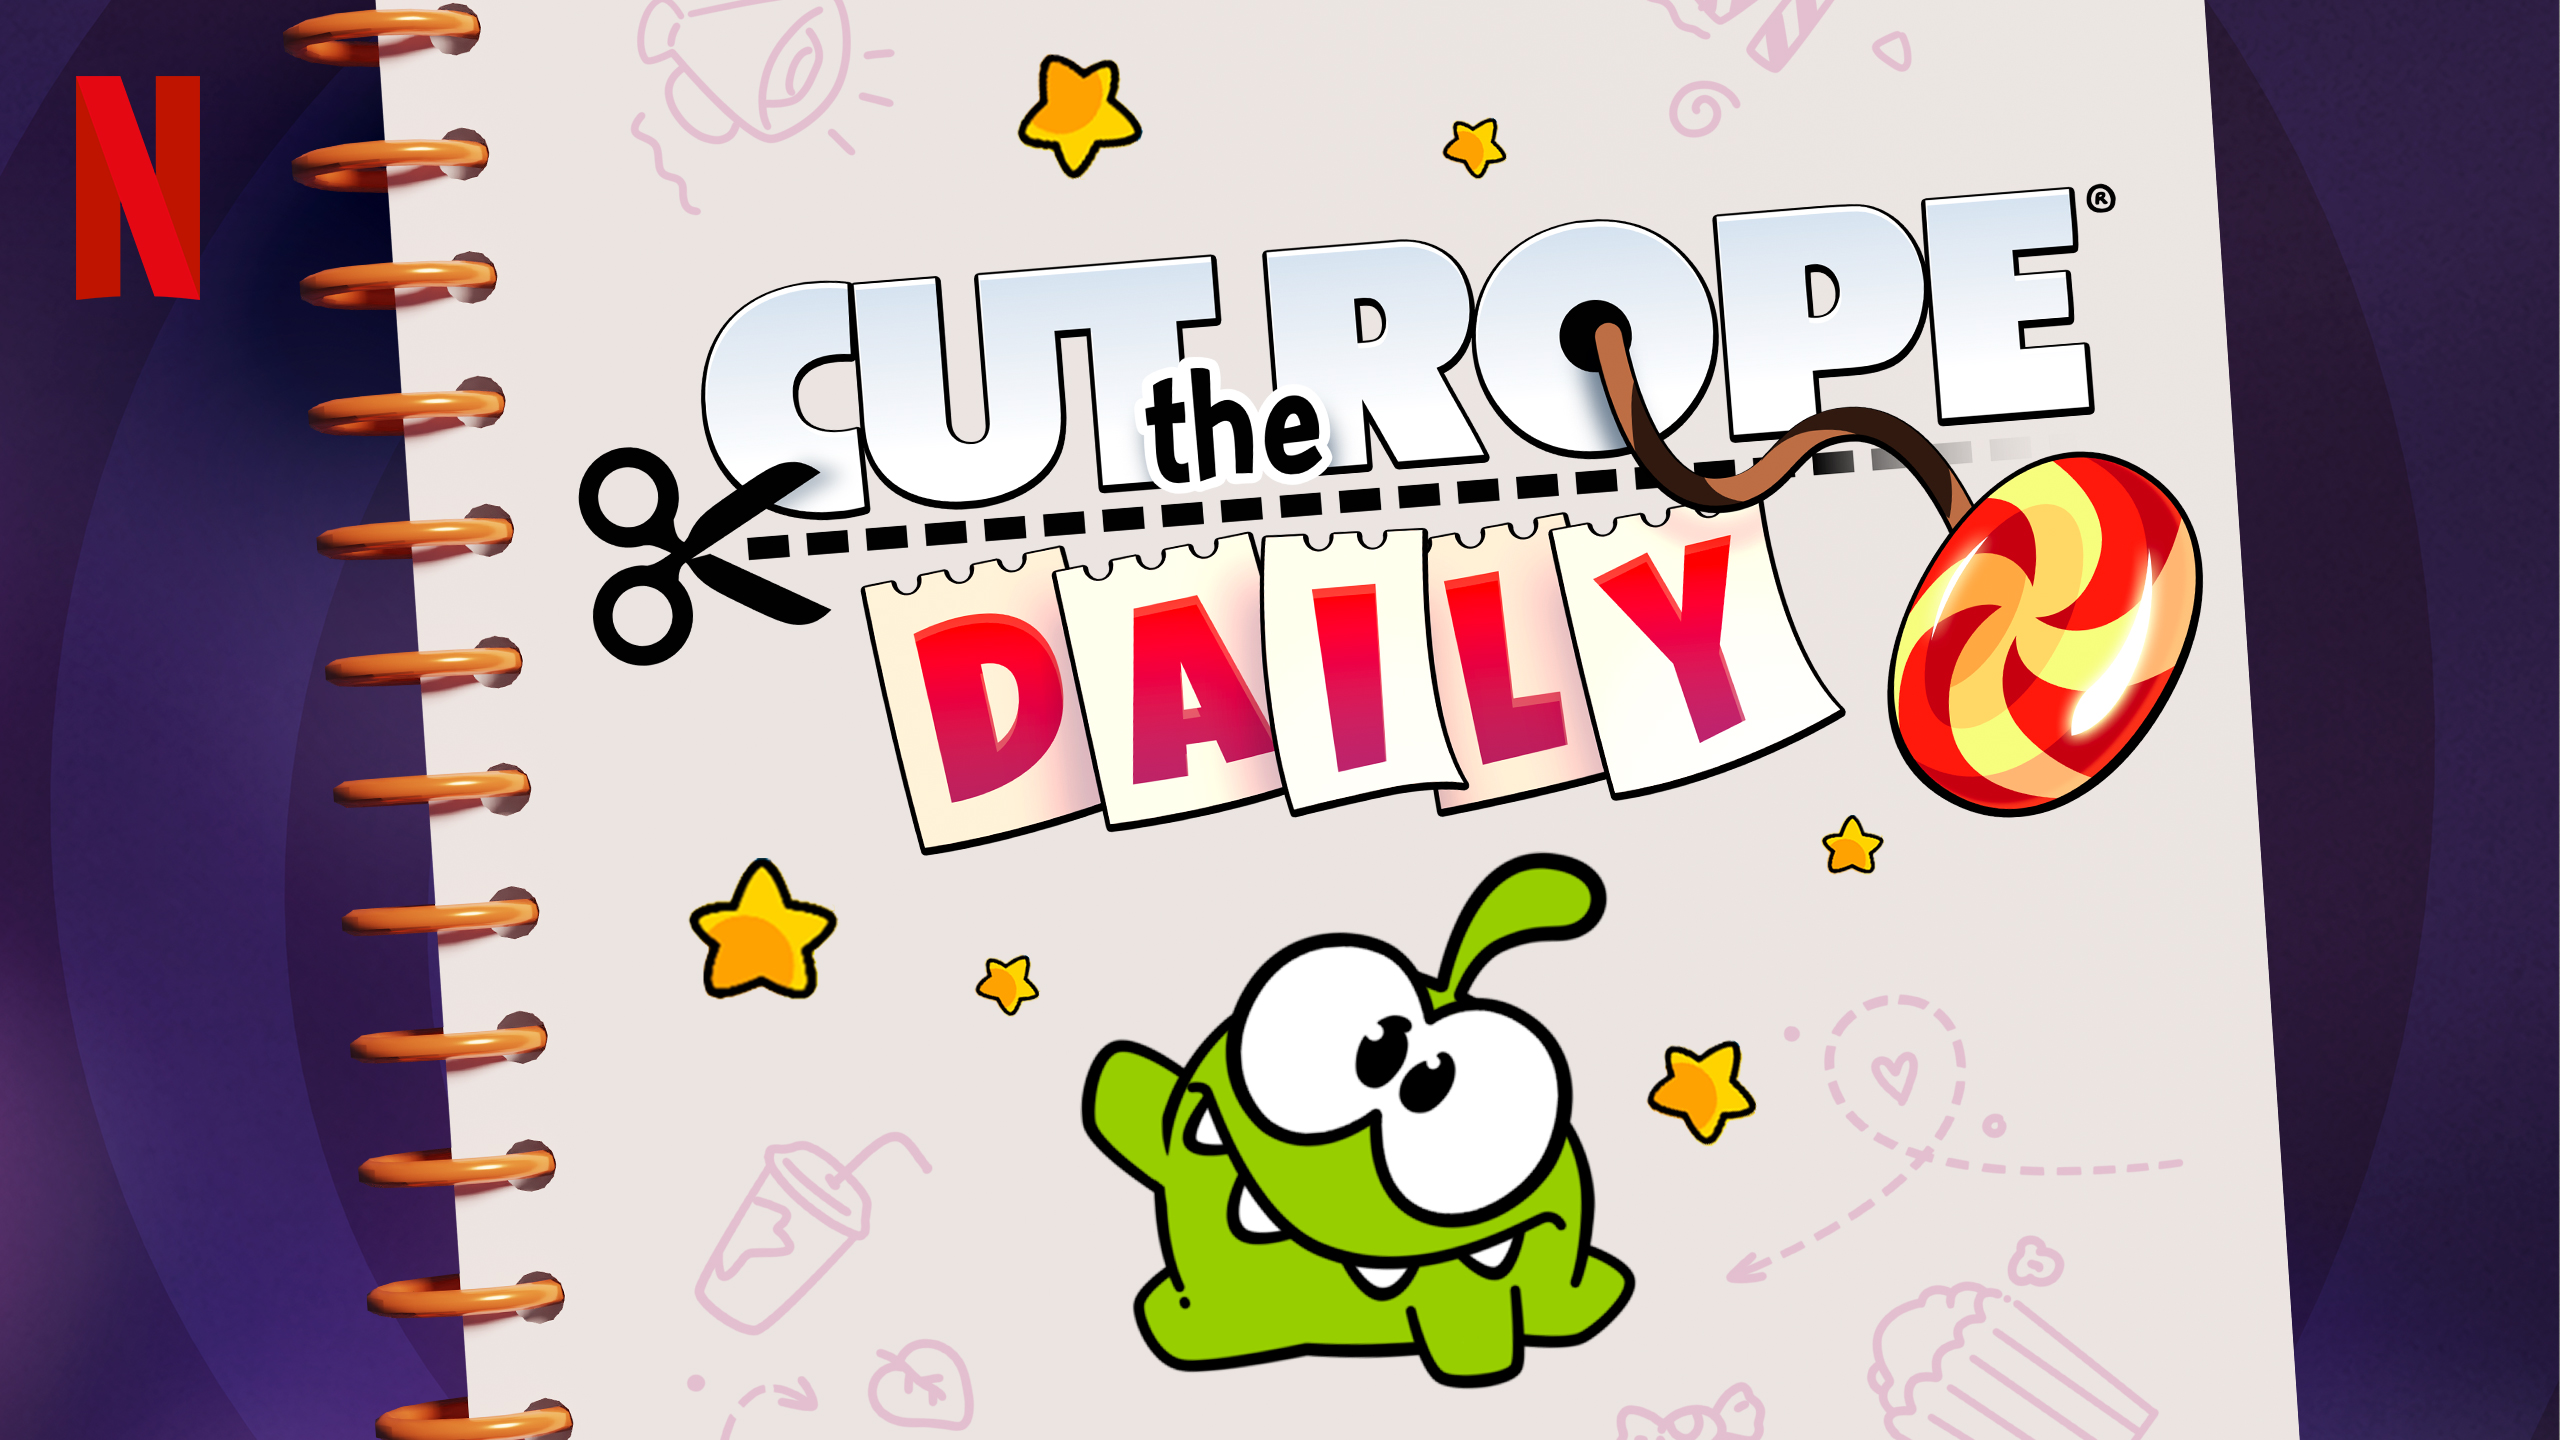 Netflix Cut the Rope Daily